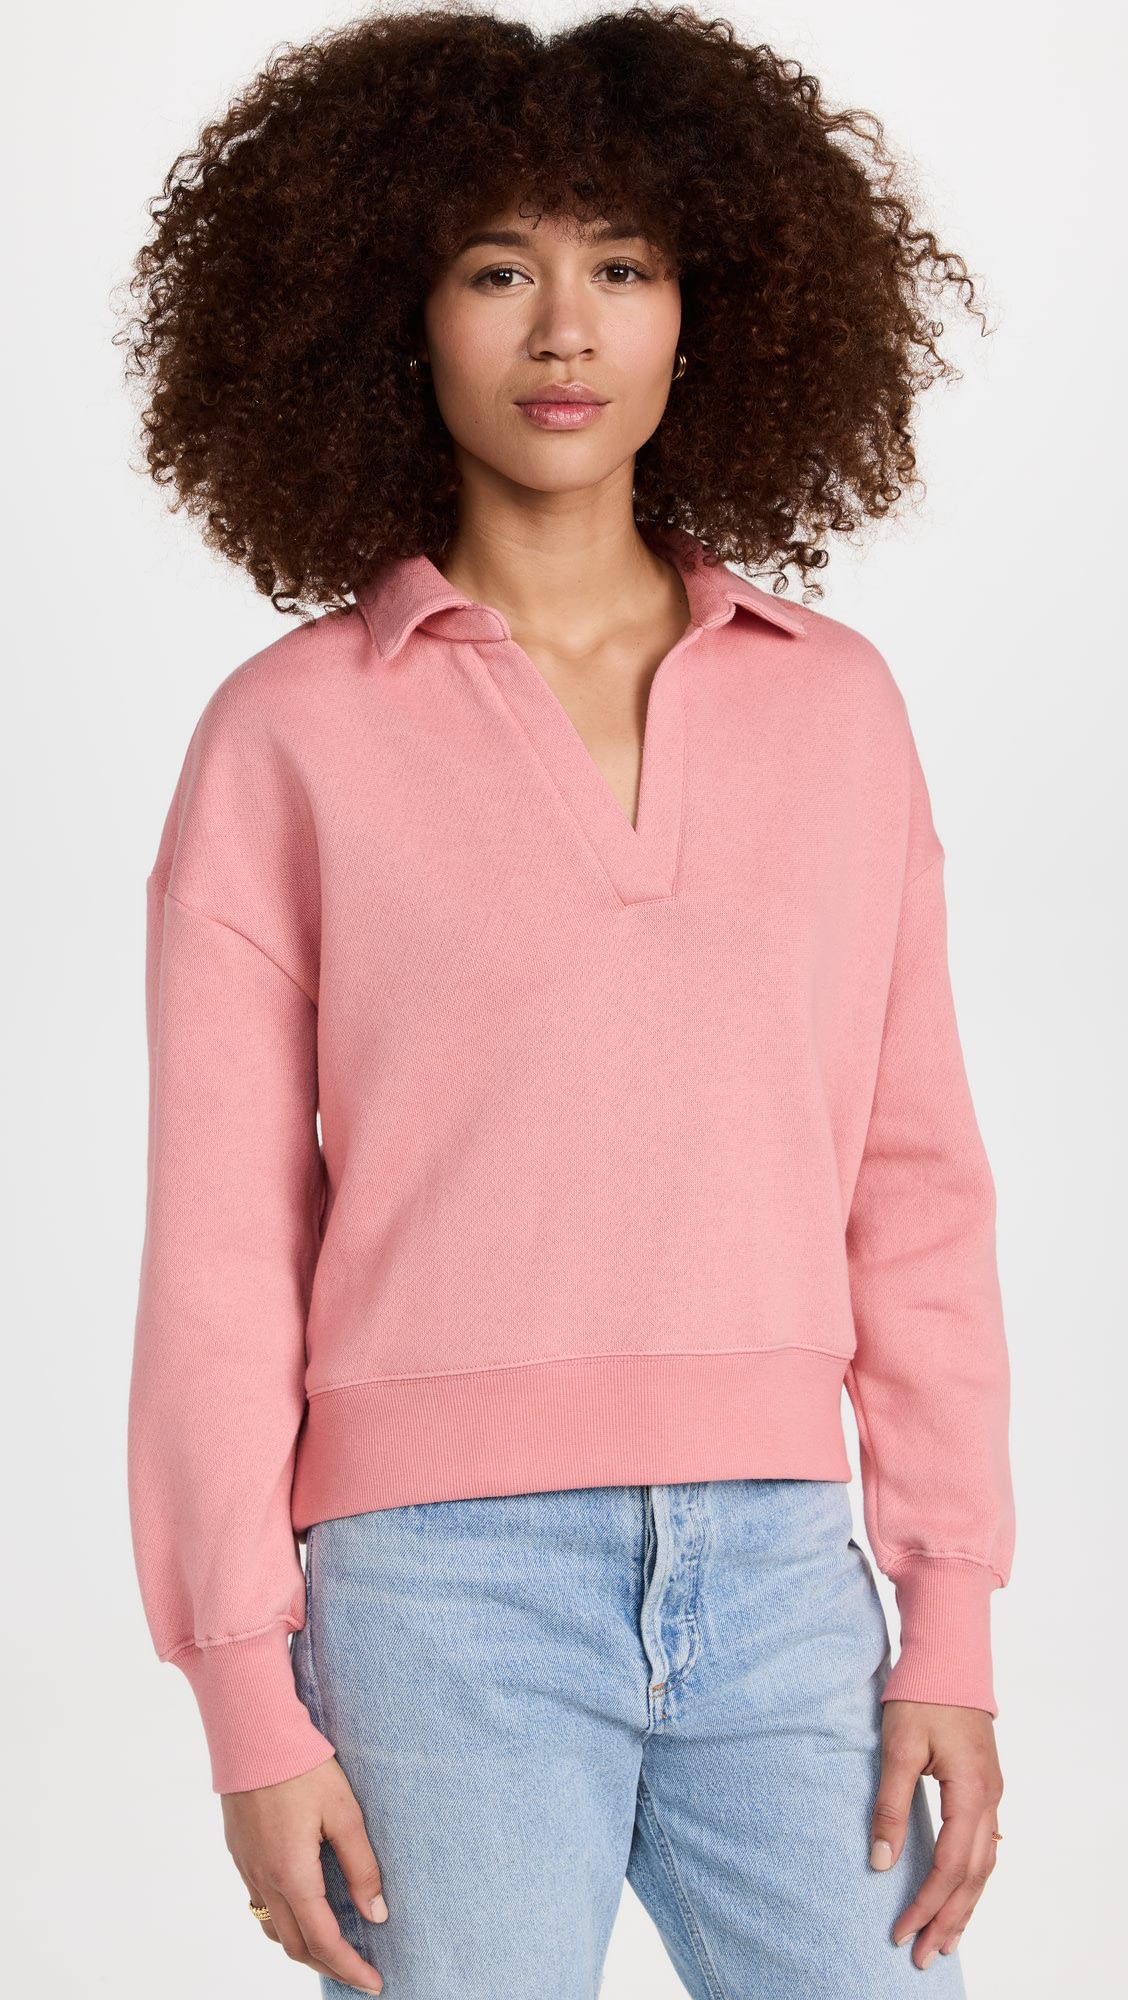 Made in china Pink V-neck loose casual casual polo neck top